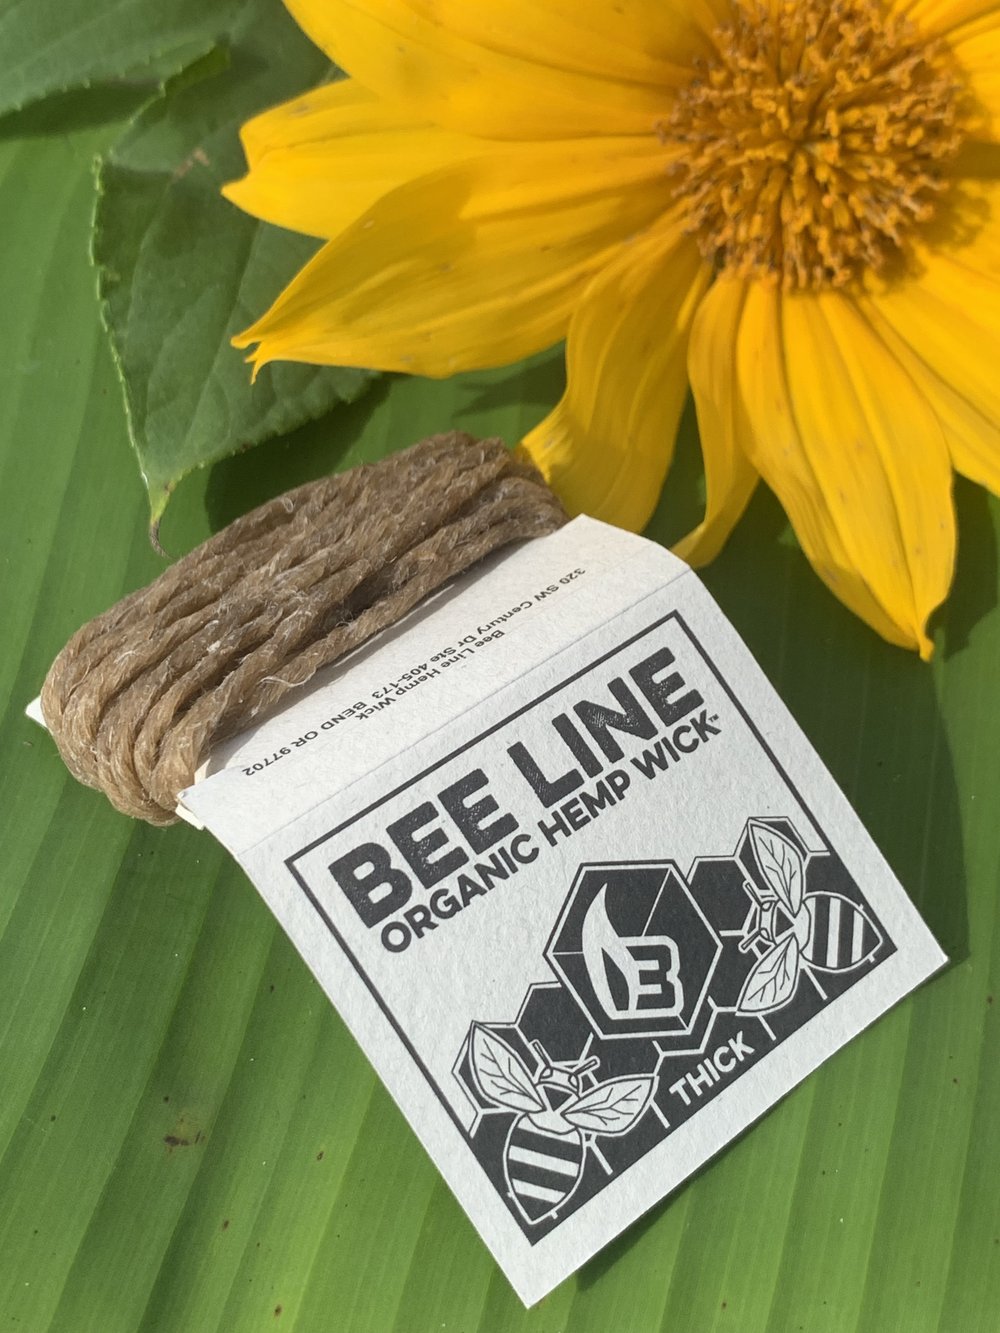 Bee Line Thick Hemp Wick Spool / $ 15.99 at 420 Science